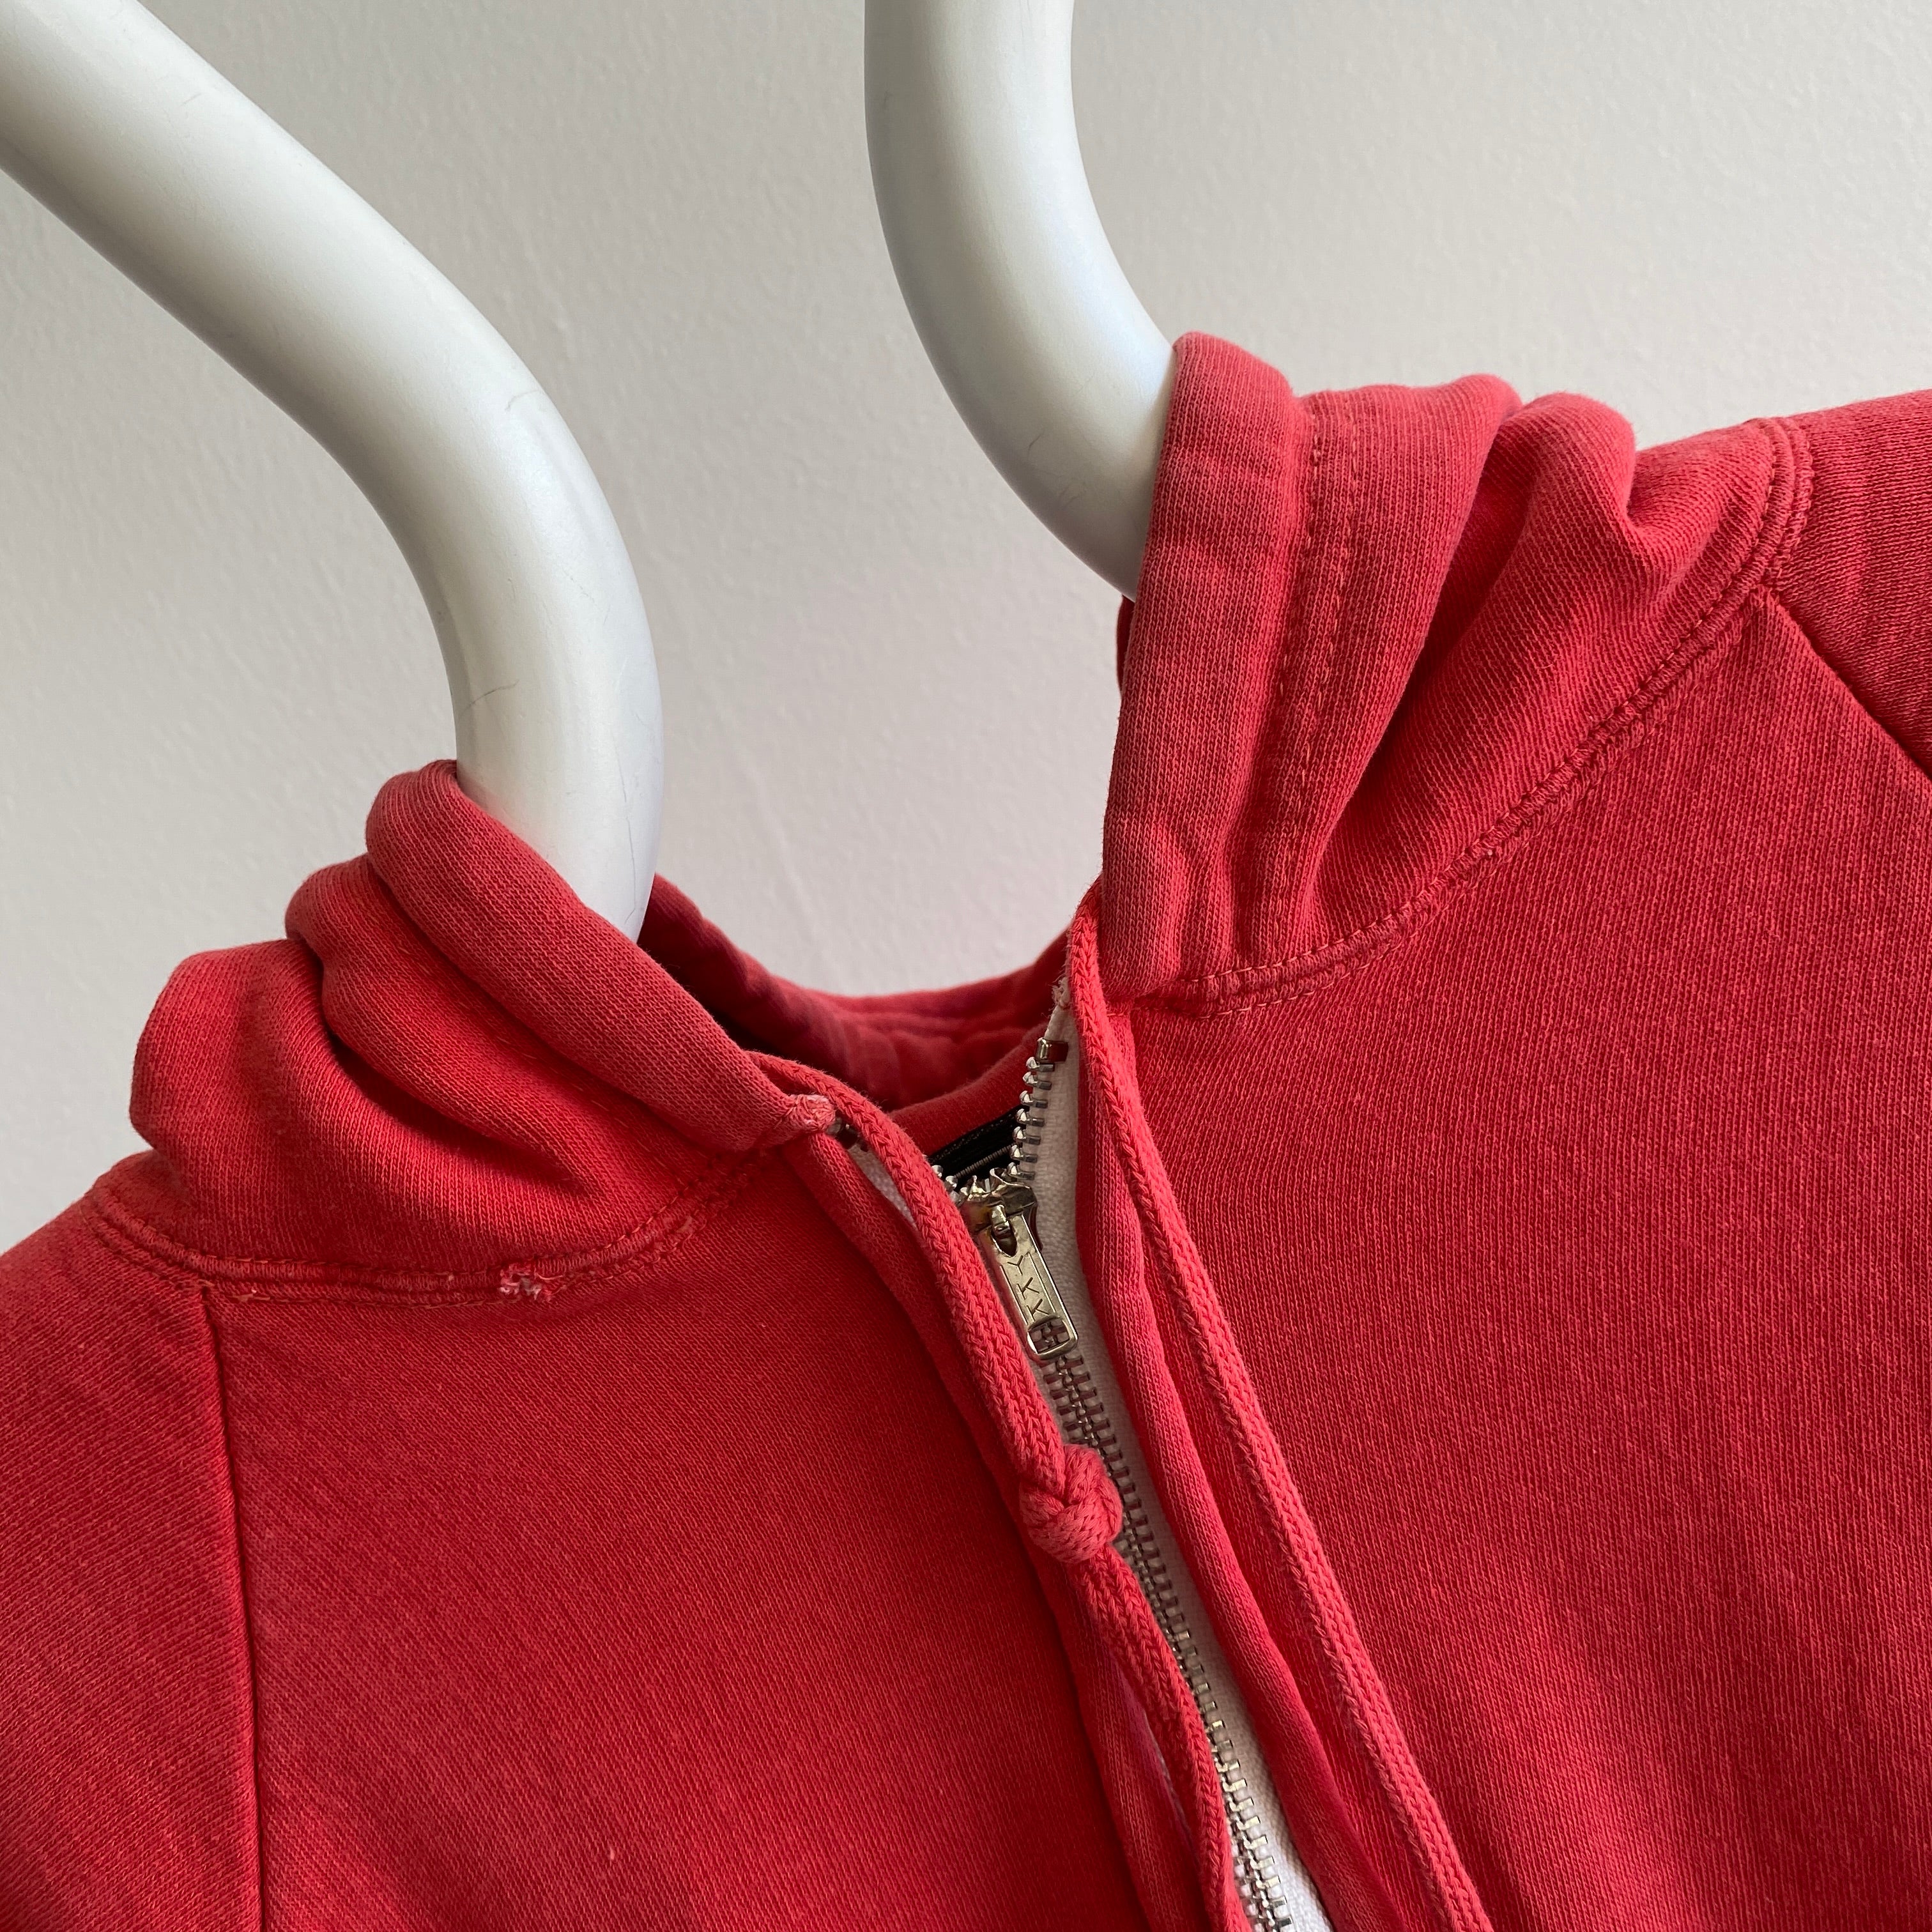 1970/80s Red Insulated Zip Up Hoodie with A Contrast Zipper